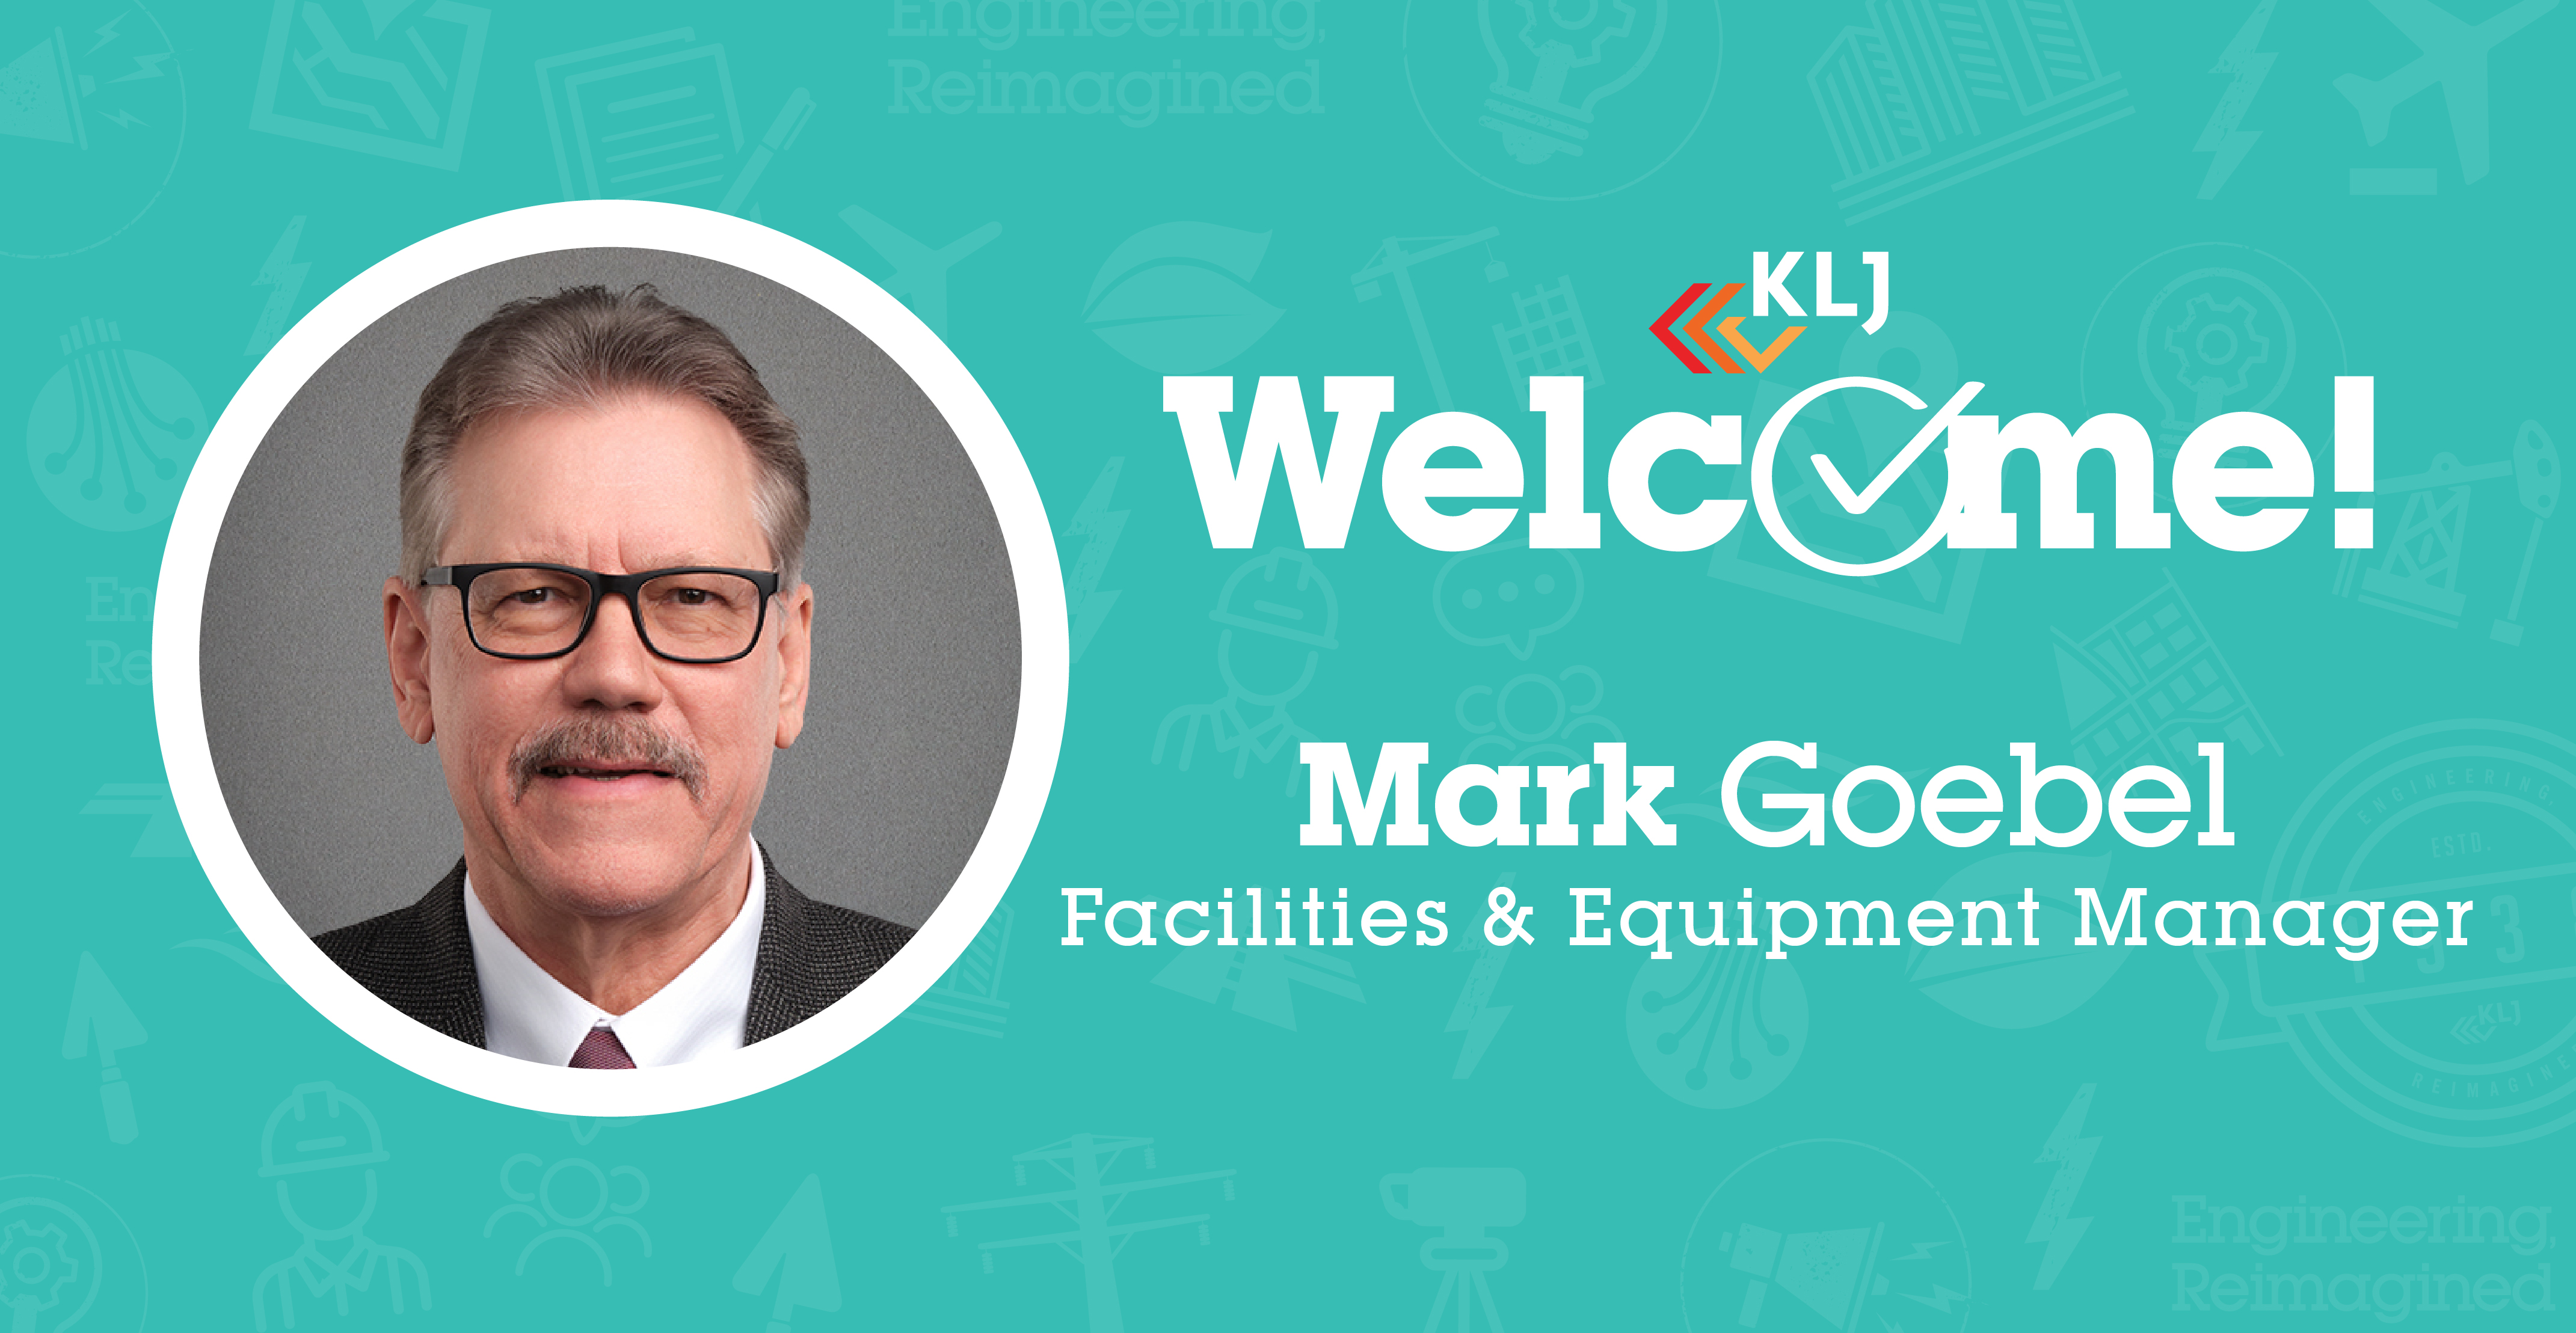 KLJ Welcomes Goebel to their St. Louis Park Office